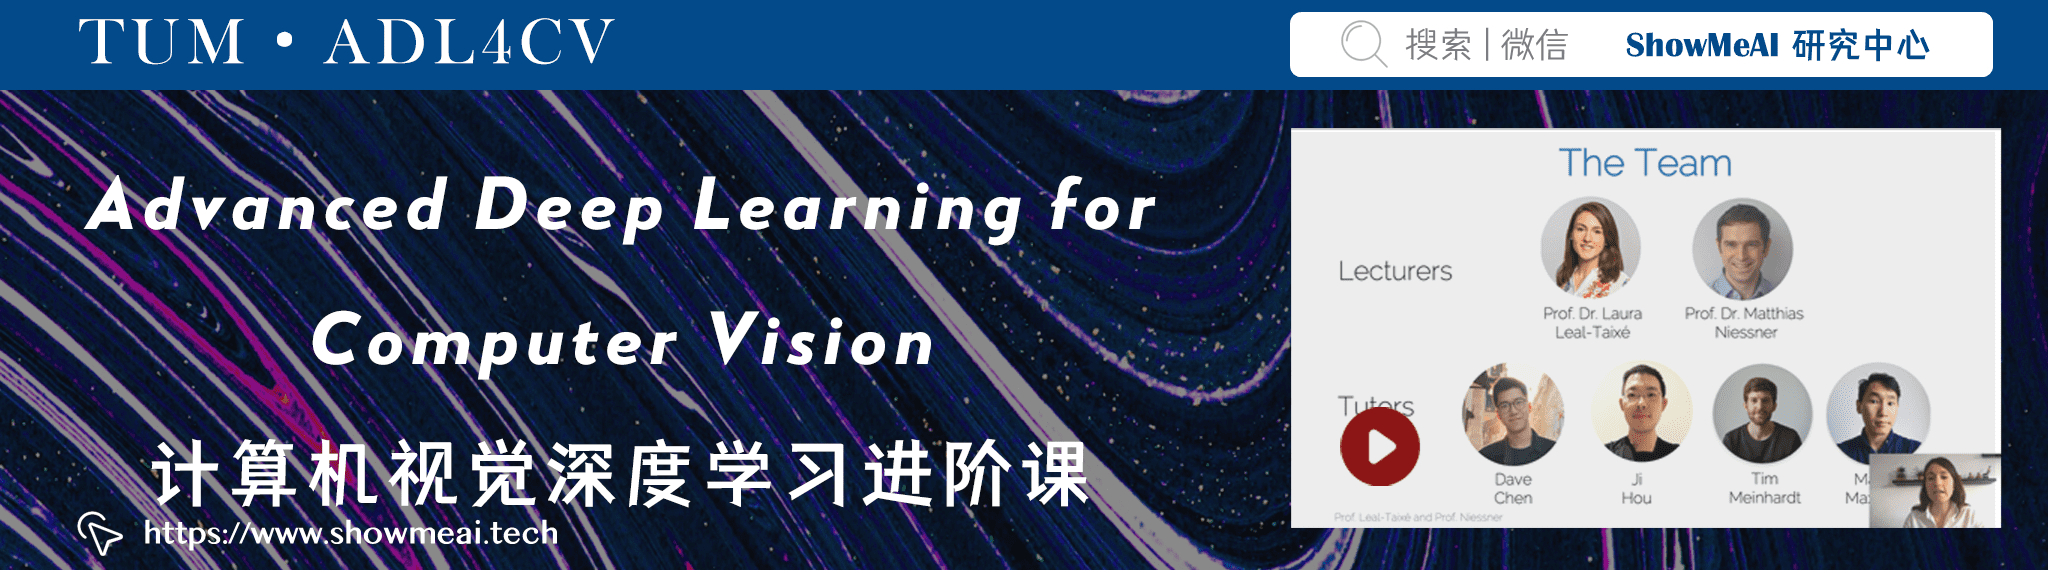 ADL4CV; Advanced Deep Learning for Computer Vision; Ӿѧϰ׿